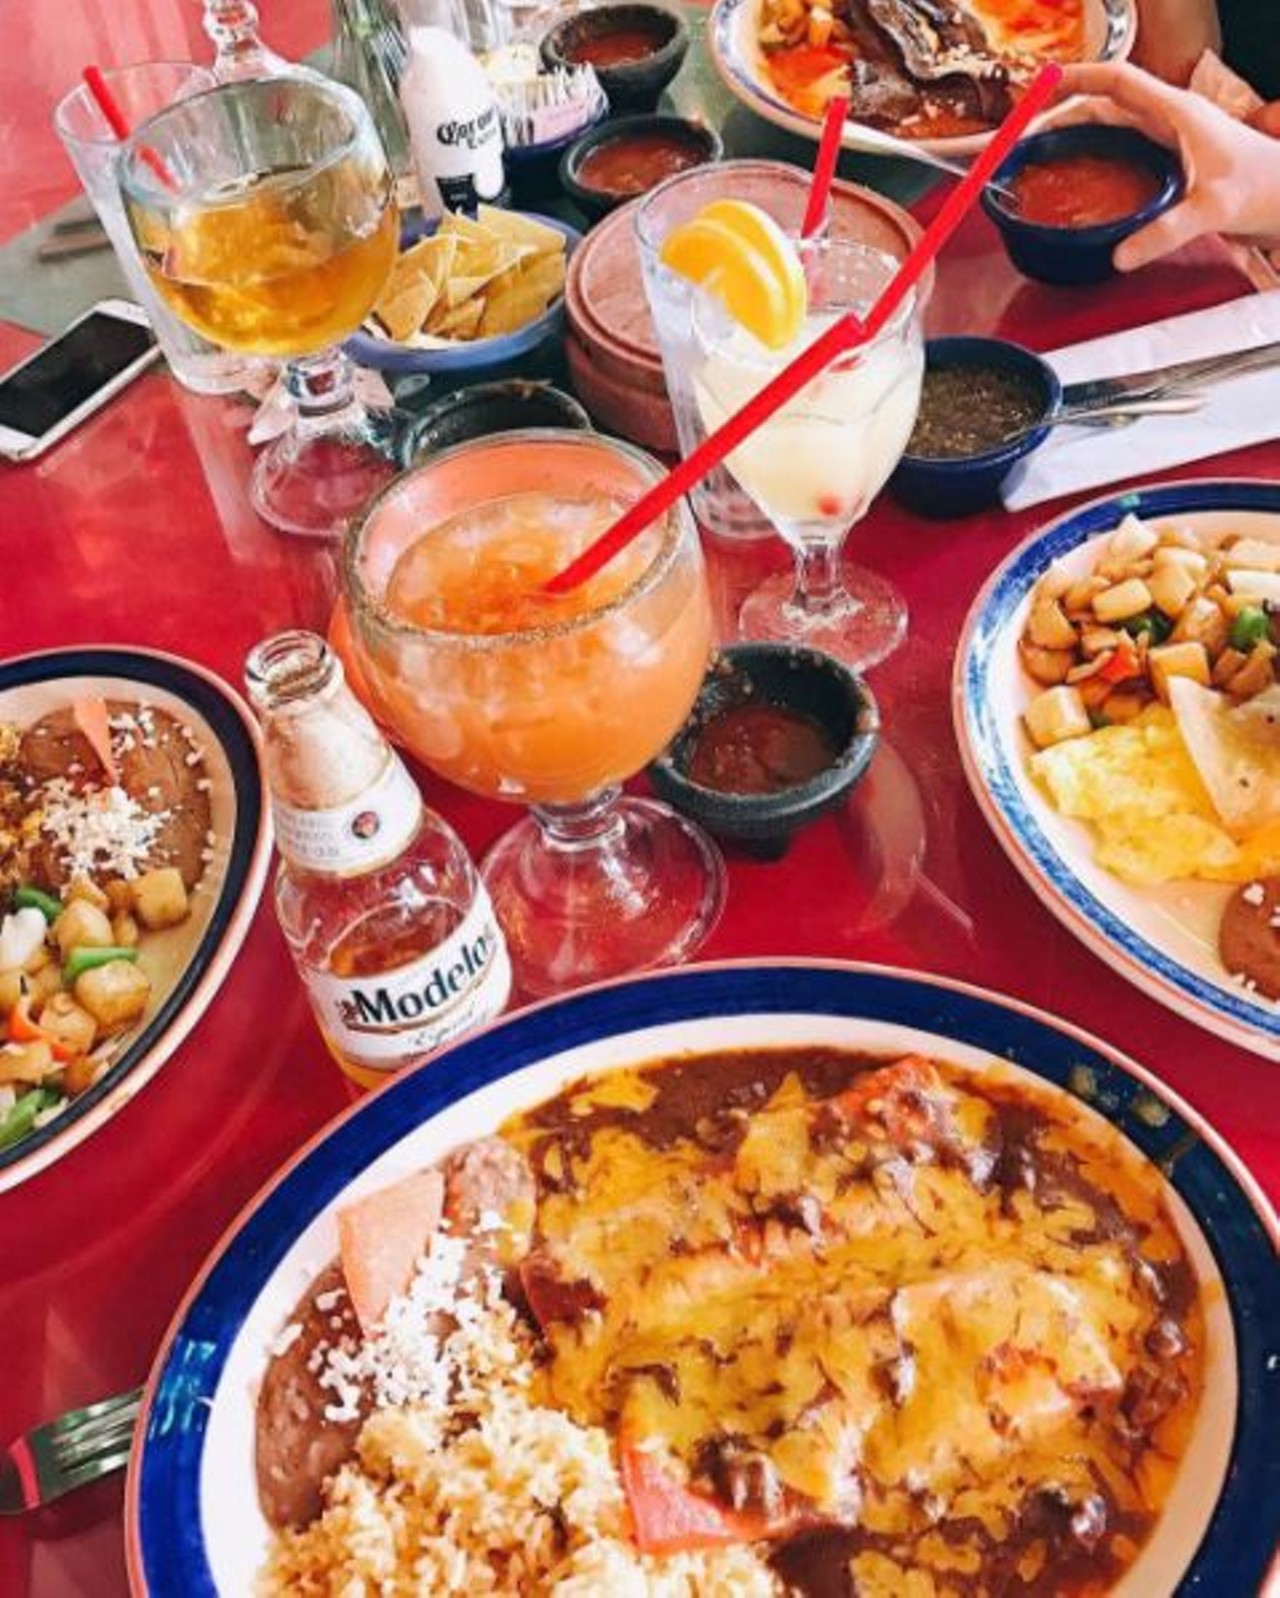 Mi Tierra218 Produce Row, (210) 225-1262
Whenever there is cause for celebration, you can bet Mi Tierra's is the place of choice.
Photo via Instagram, professionalbruncherssociety
